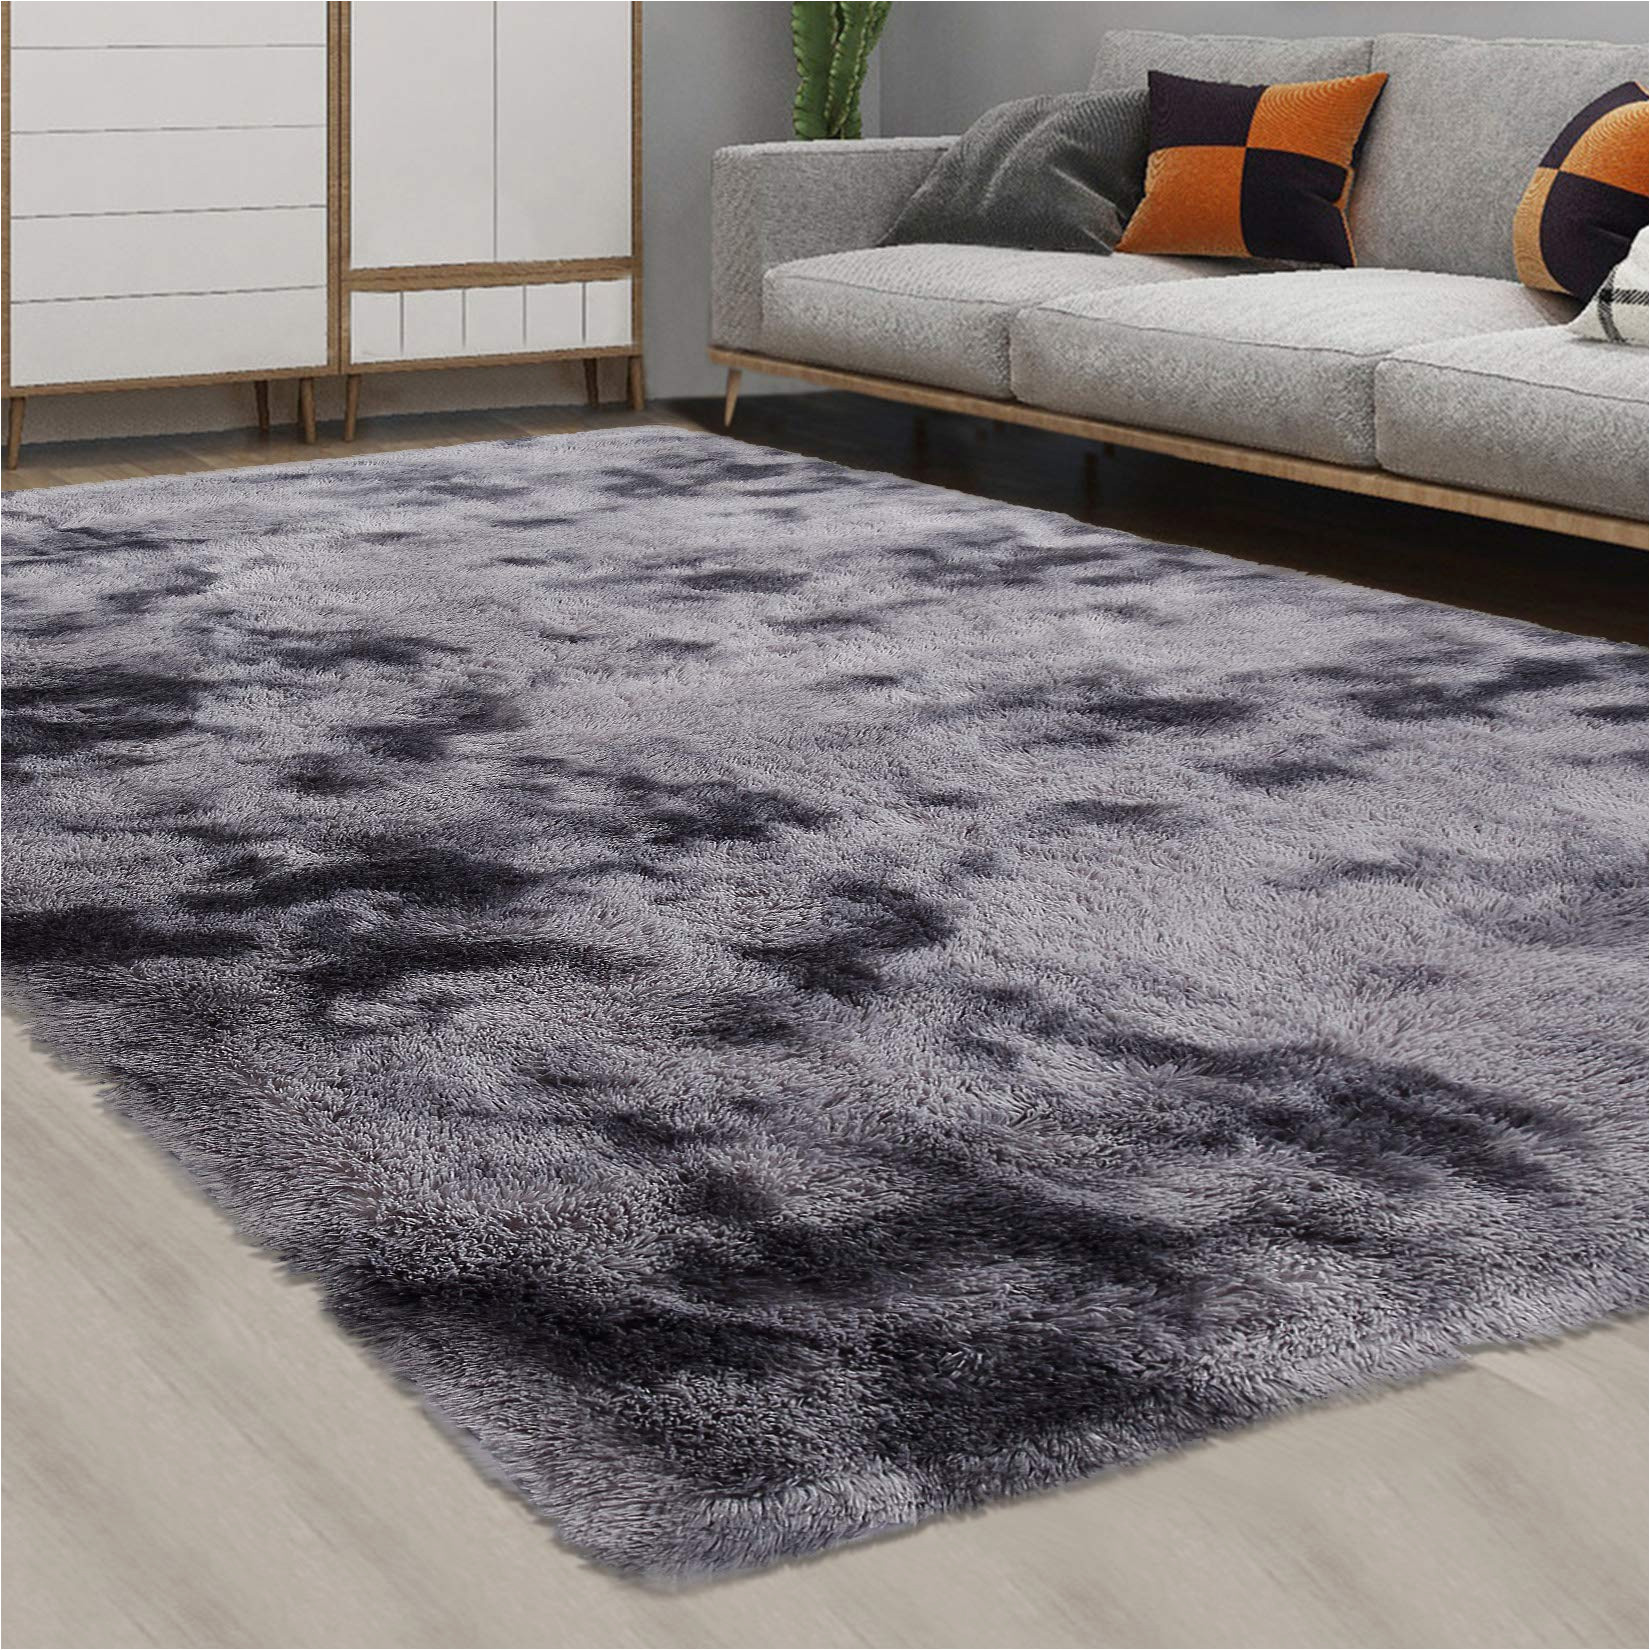 Extra Large soft area Rugs Caromio area Rug for Bedroom, Extra Large 8′ X 10′ Fluffy Rugs Shag Rugs for Living Room Furry Rugs for Girls Boys Room Shaggy Rug for Kids Baby Room …